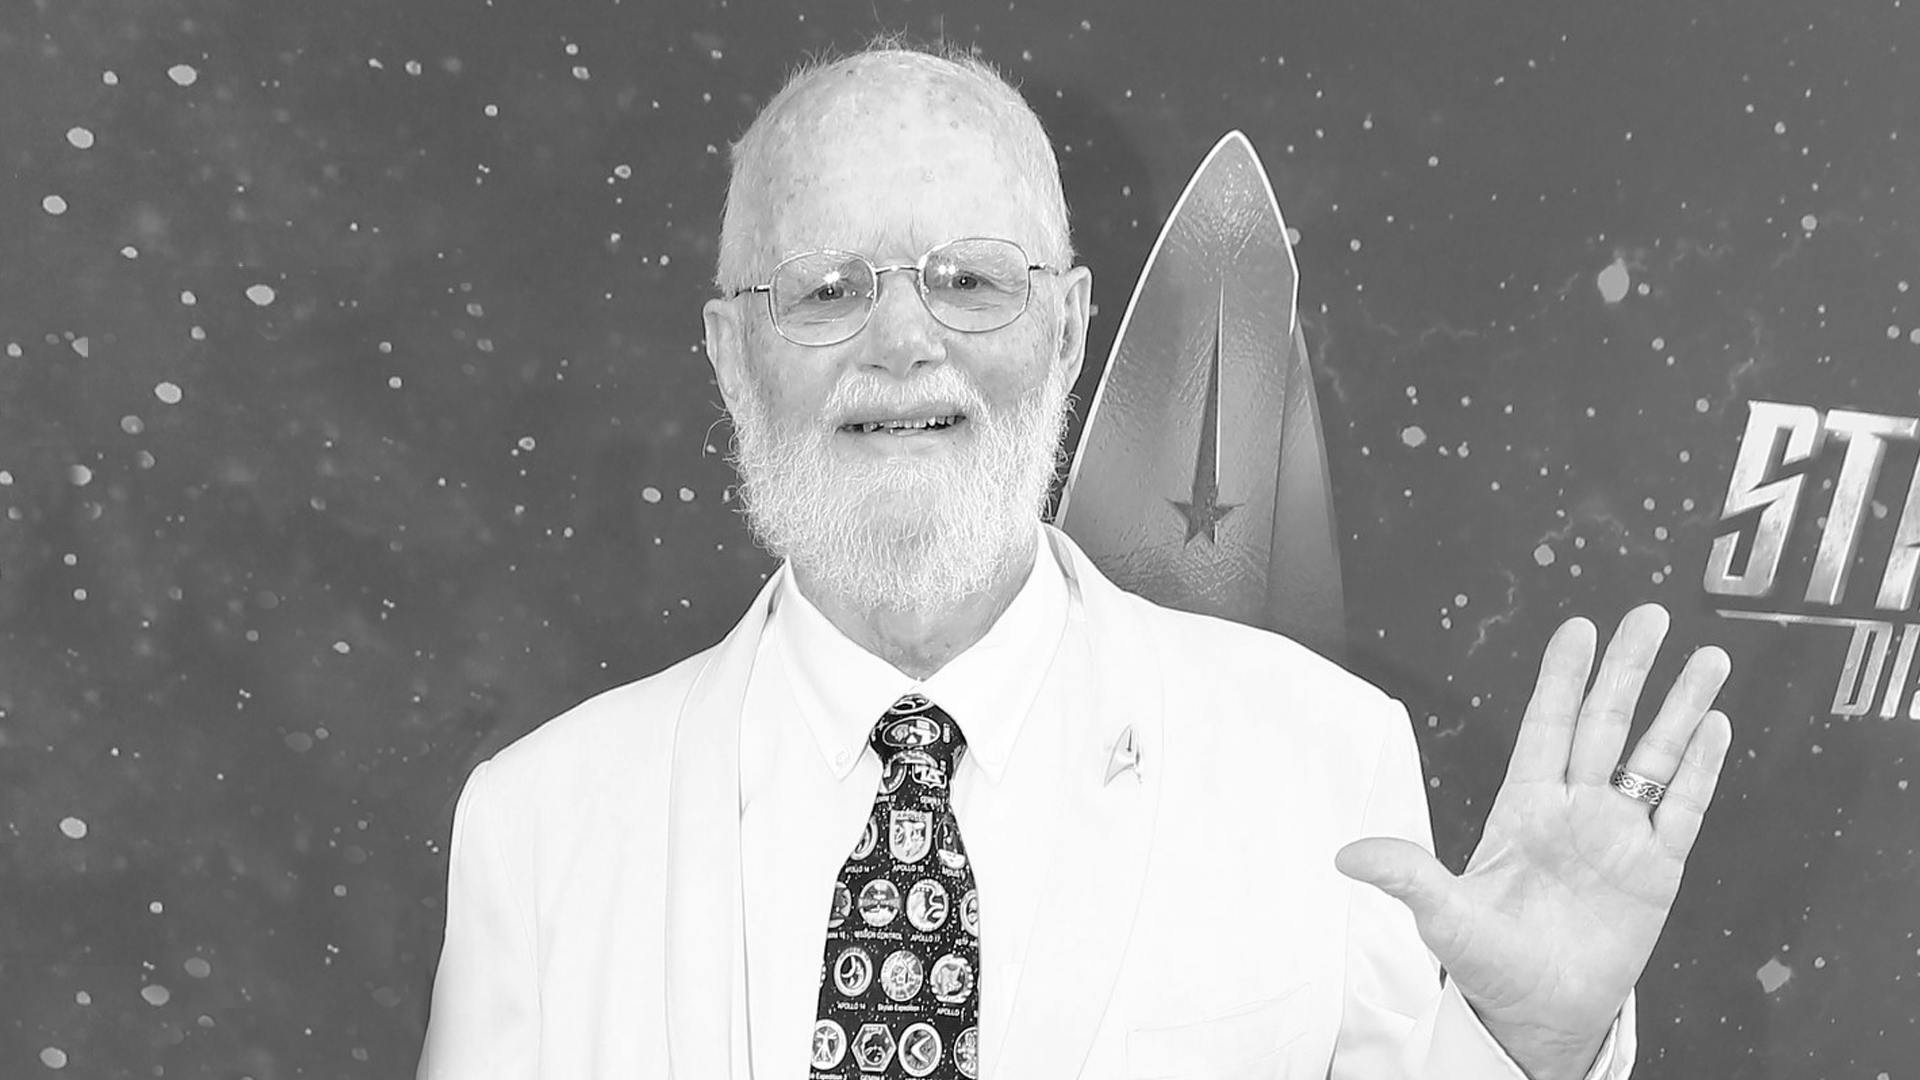 John Trimble attends the Star Trek: Discovery Season 1 red carpet premiere and flashes the Vulcan salute